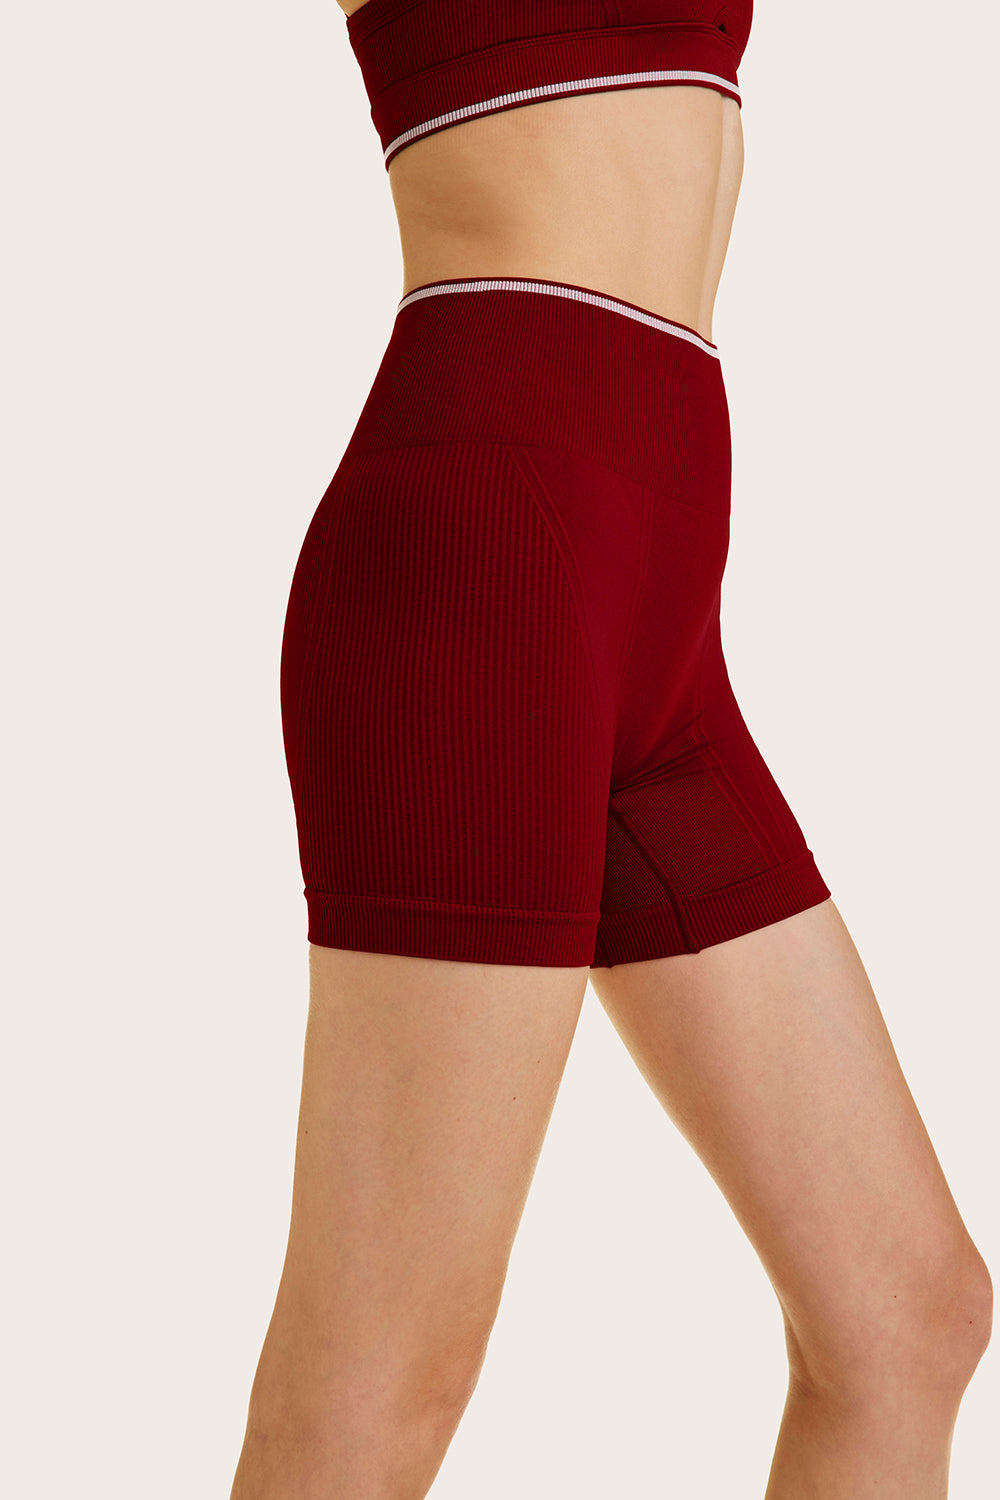 Long Seamless Soft Modal Cotton and Skinny Cycling, Yoga, Casual Shorts